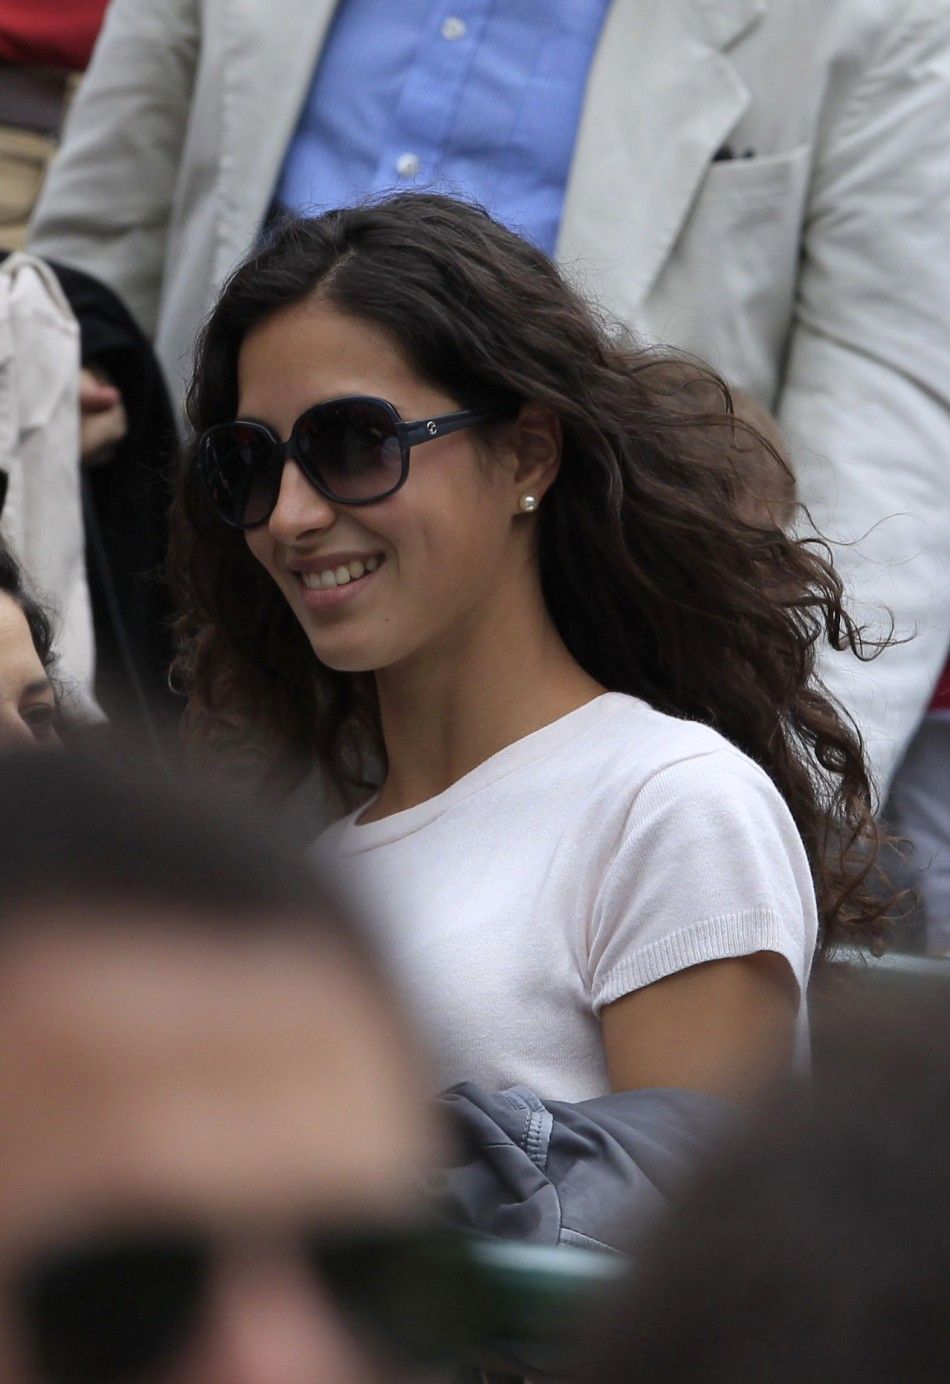 Maria Francisca Perello, the girlfriend of Rafael Nadal of Spain, leaves Court 1 after Nadal039s match against Gilles Muller of Luxembourg at the Wimbledon tennis championships in London